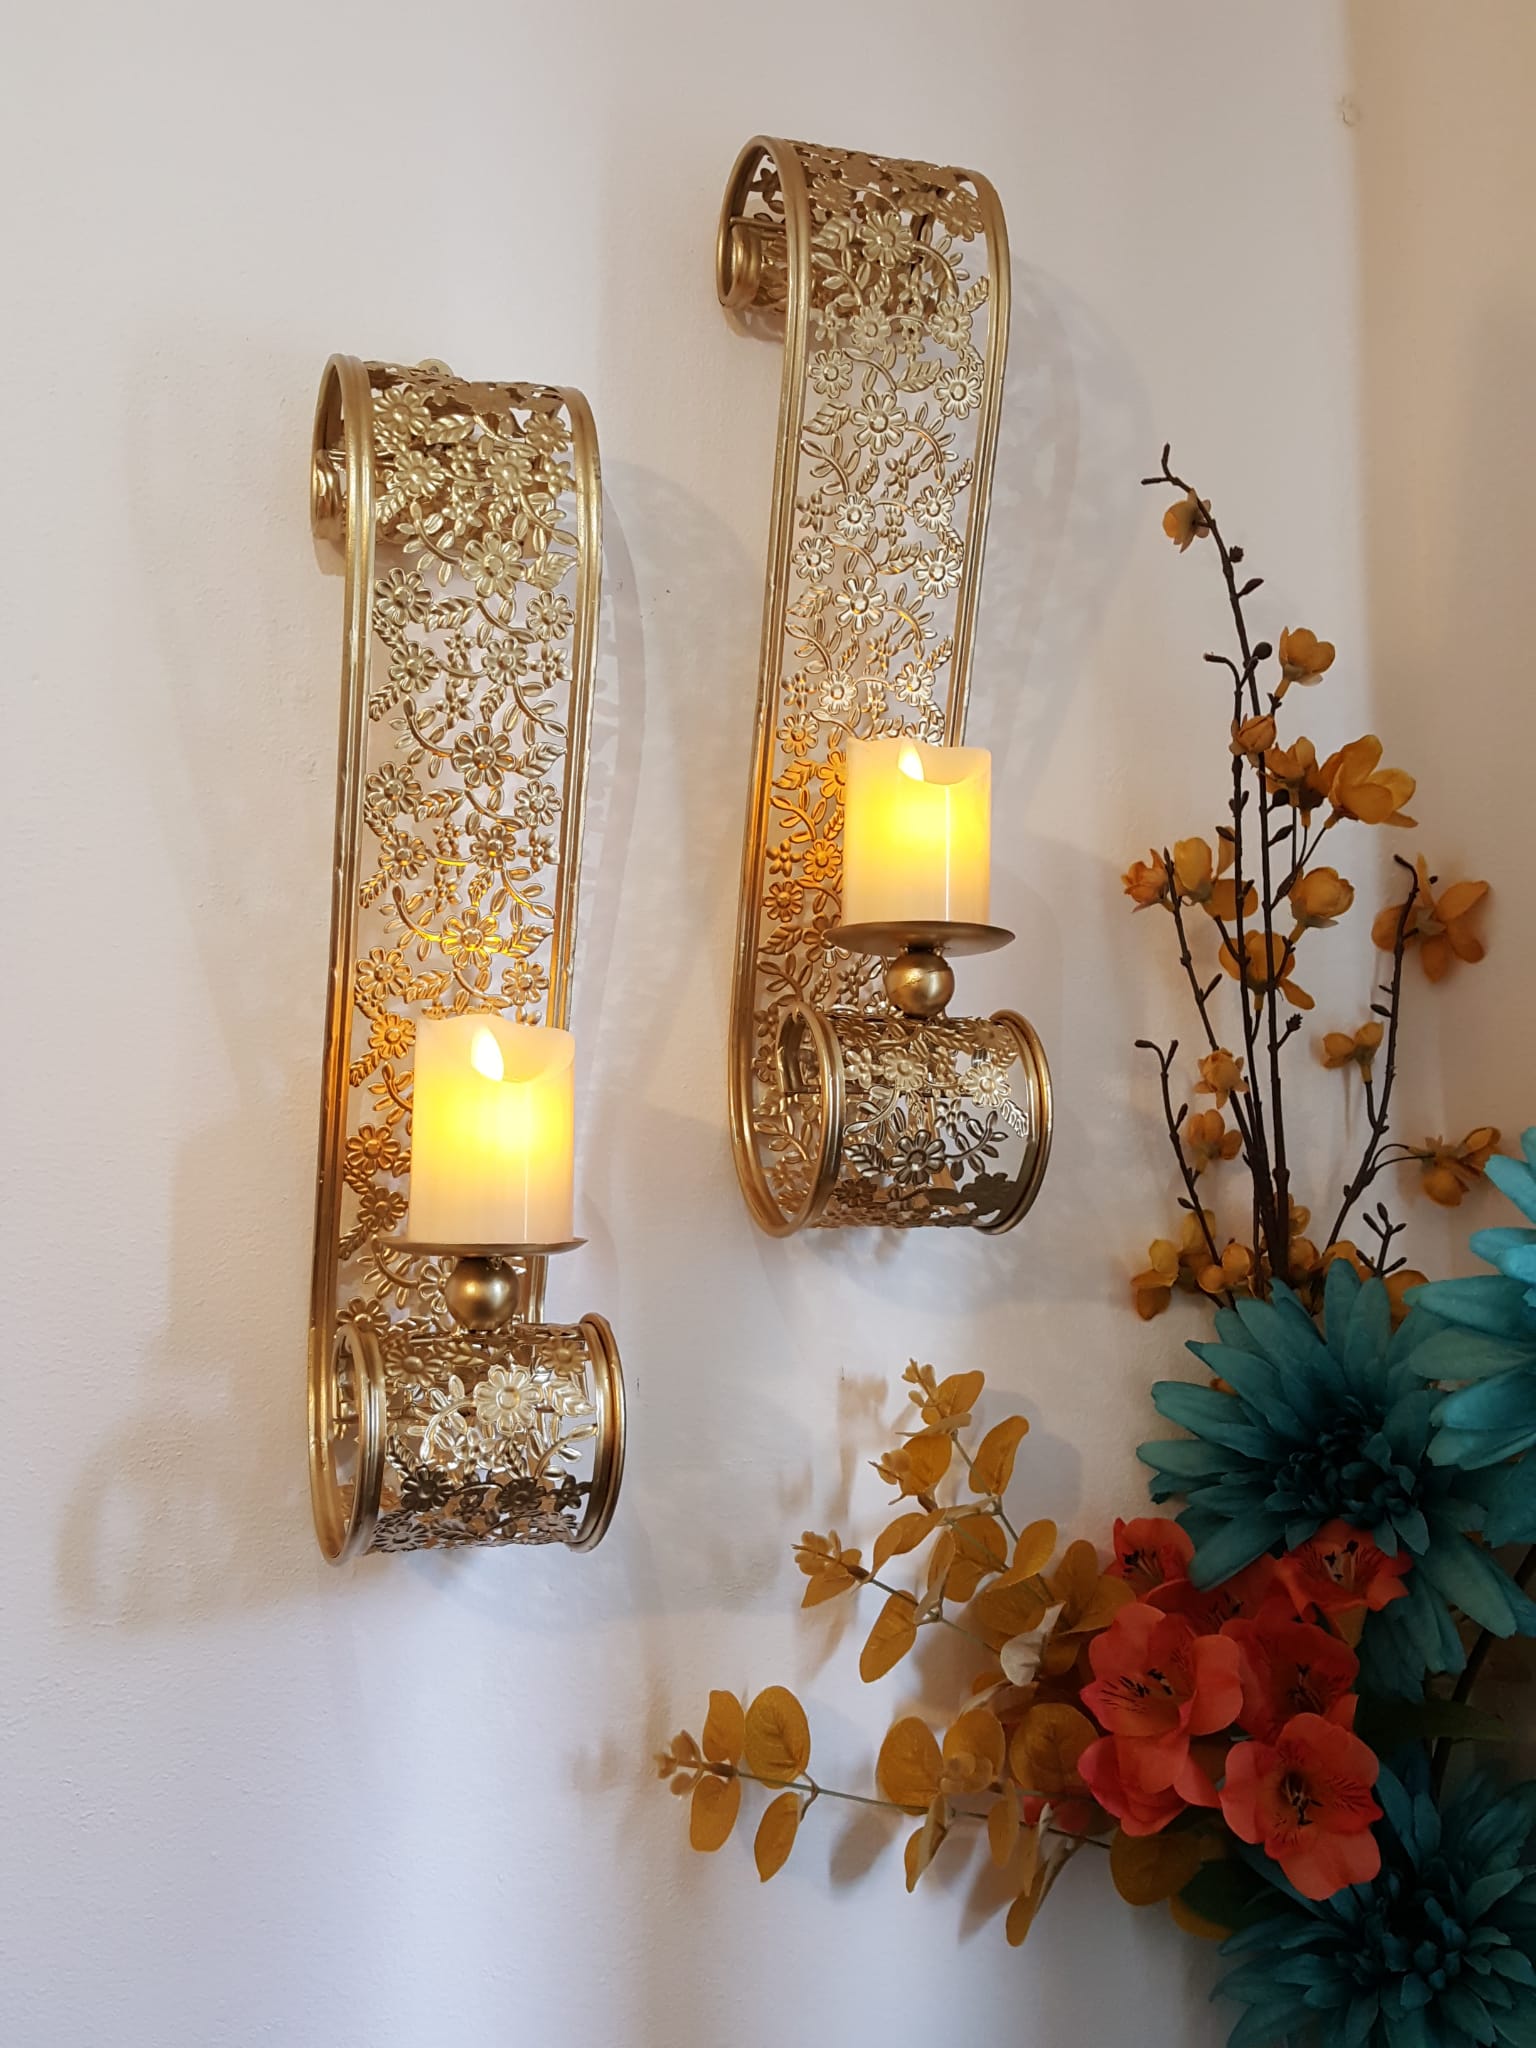 New Metal Wall Candle Sconces Pair with Led Wax Candles - Wall Candle Holders - Golden